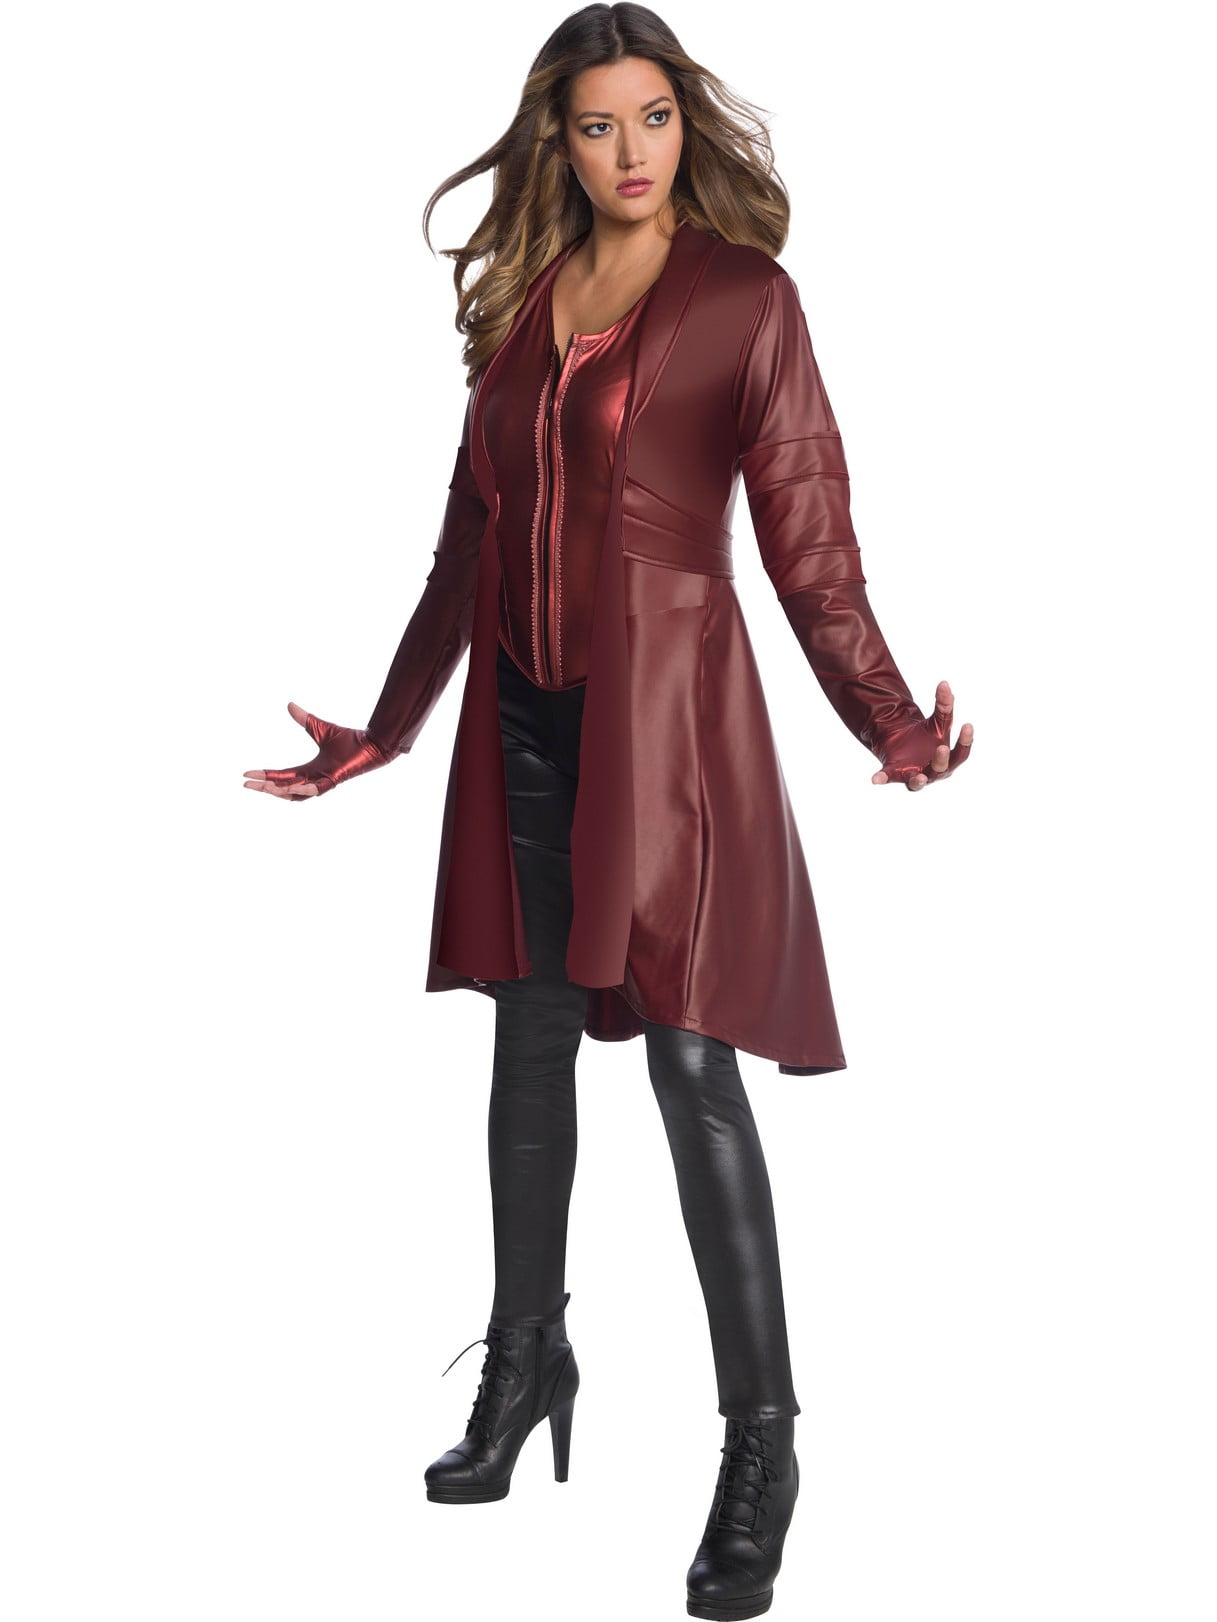 Scarlet Witch Avengers Endgame Secret Wishes Womens Costume Wisconsin